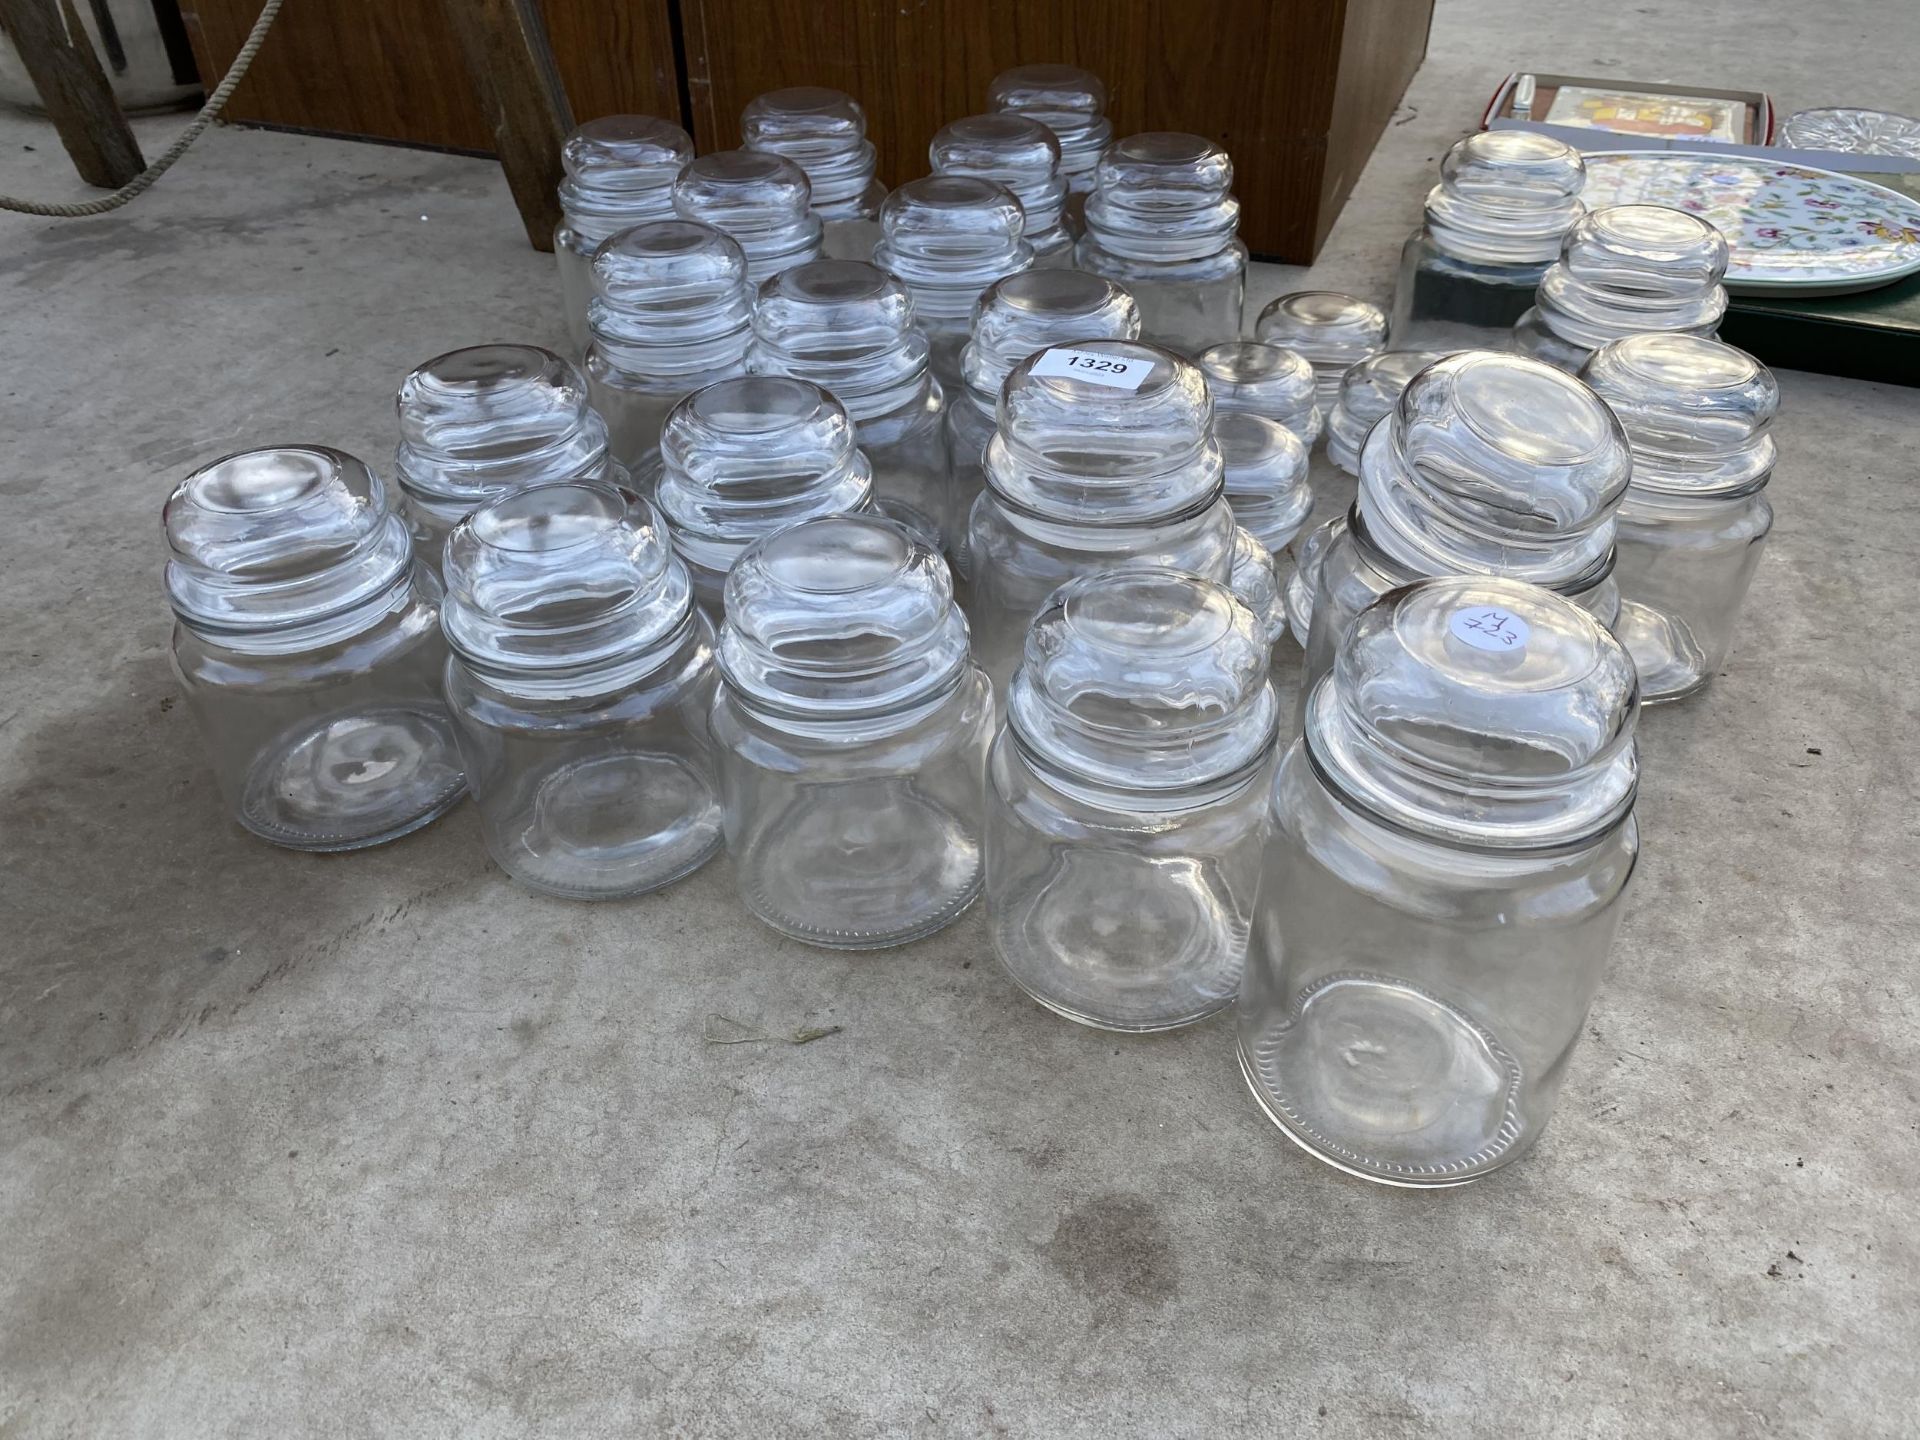 A LARGE ASSORTMENT OF GLASS STORAGE JARS WITH LIDS